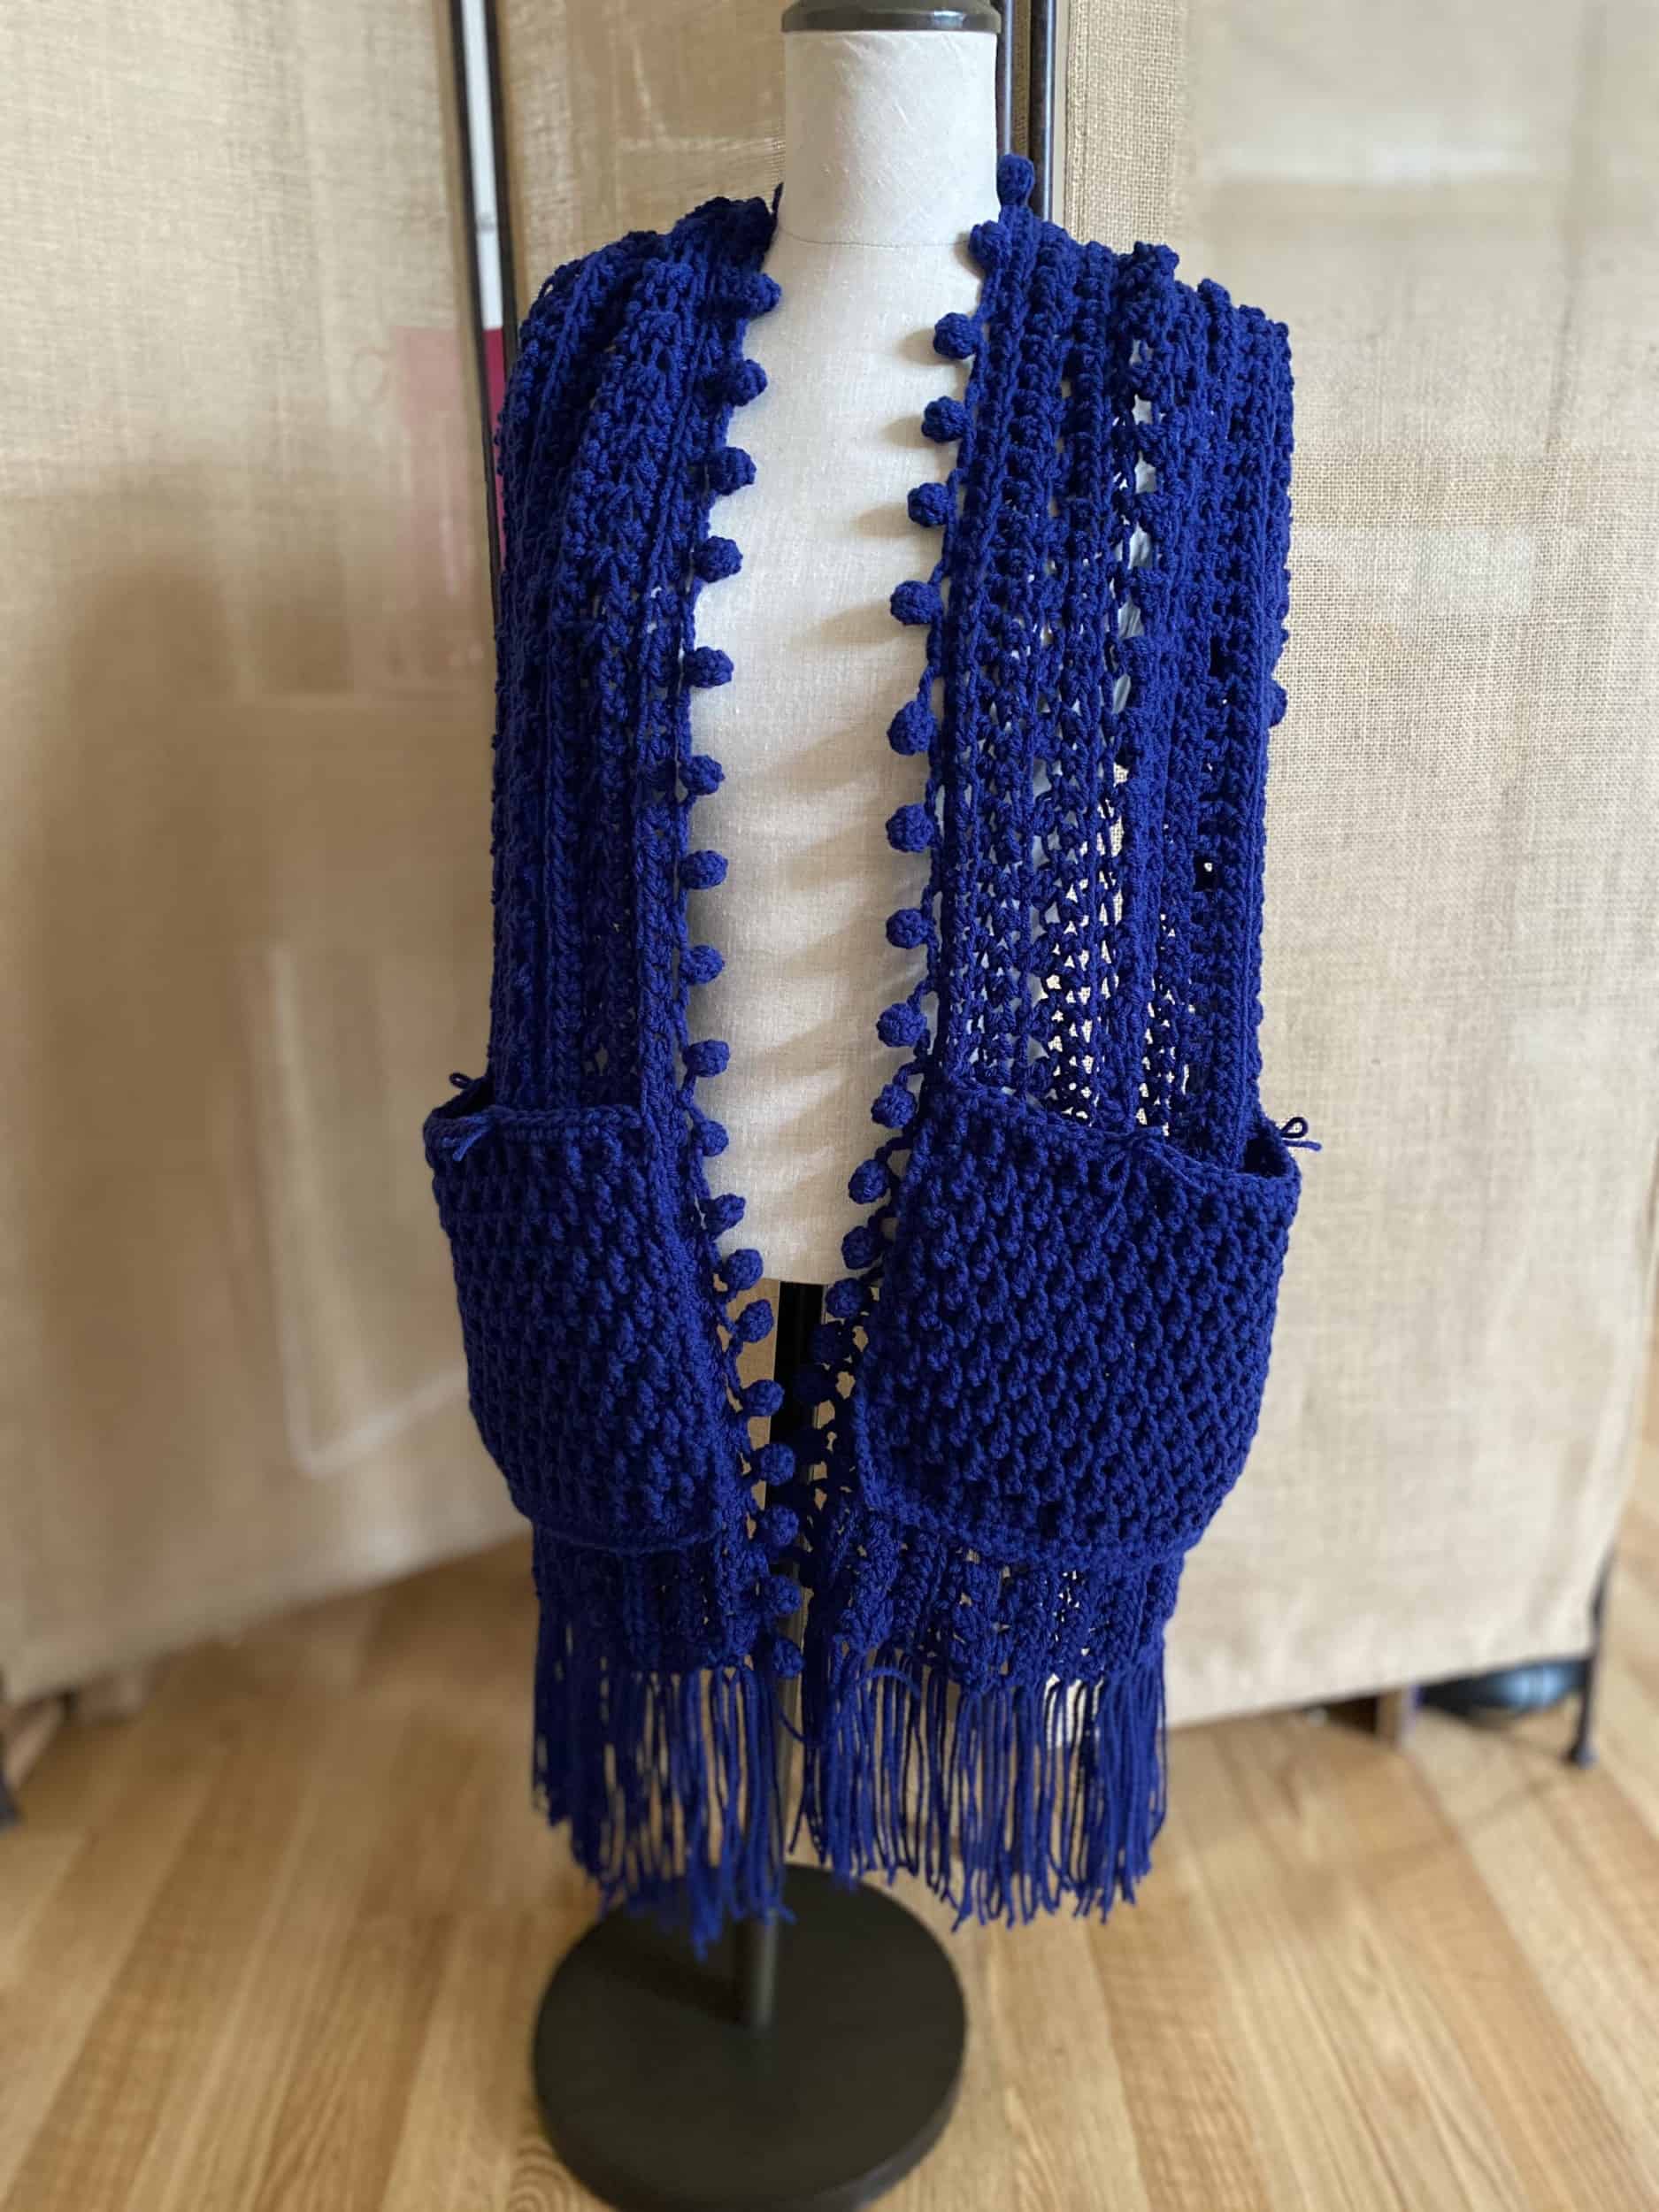 This Crochet Pocket Shawl Scarf is made with love by Classy Crafty Wife! Shop more unique gift ideas today with Spots Initiatives, the best way to support creators.